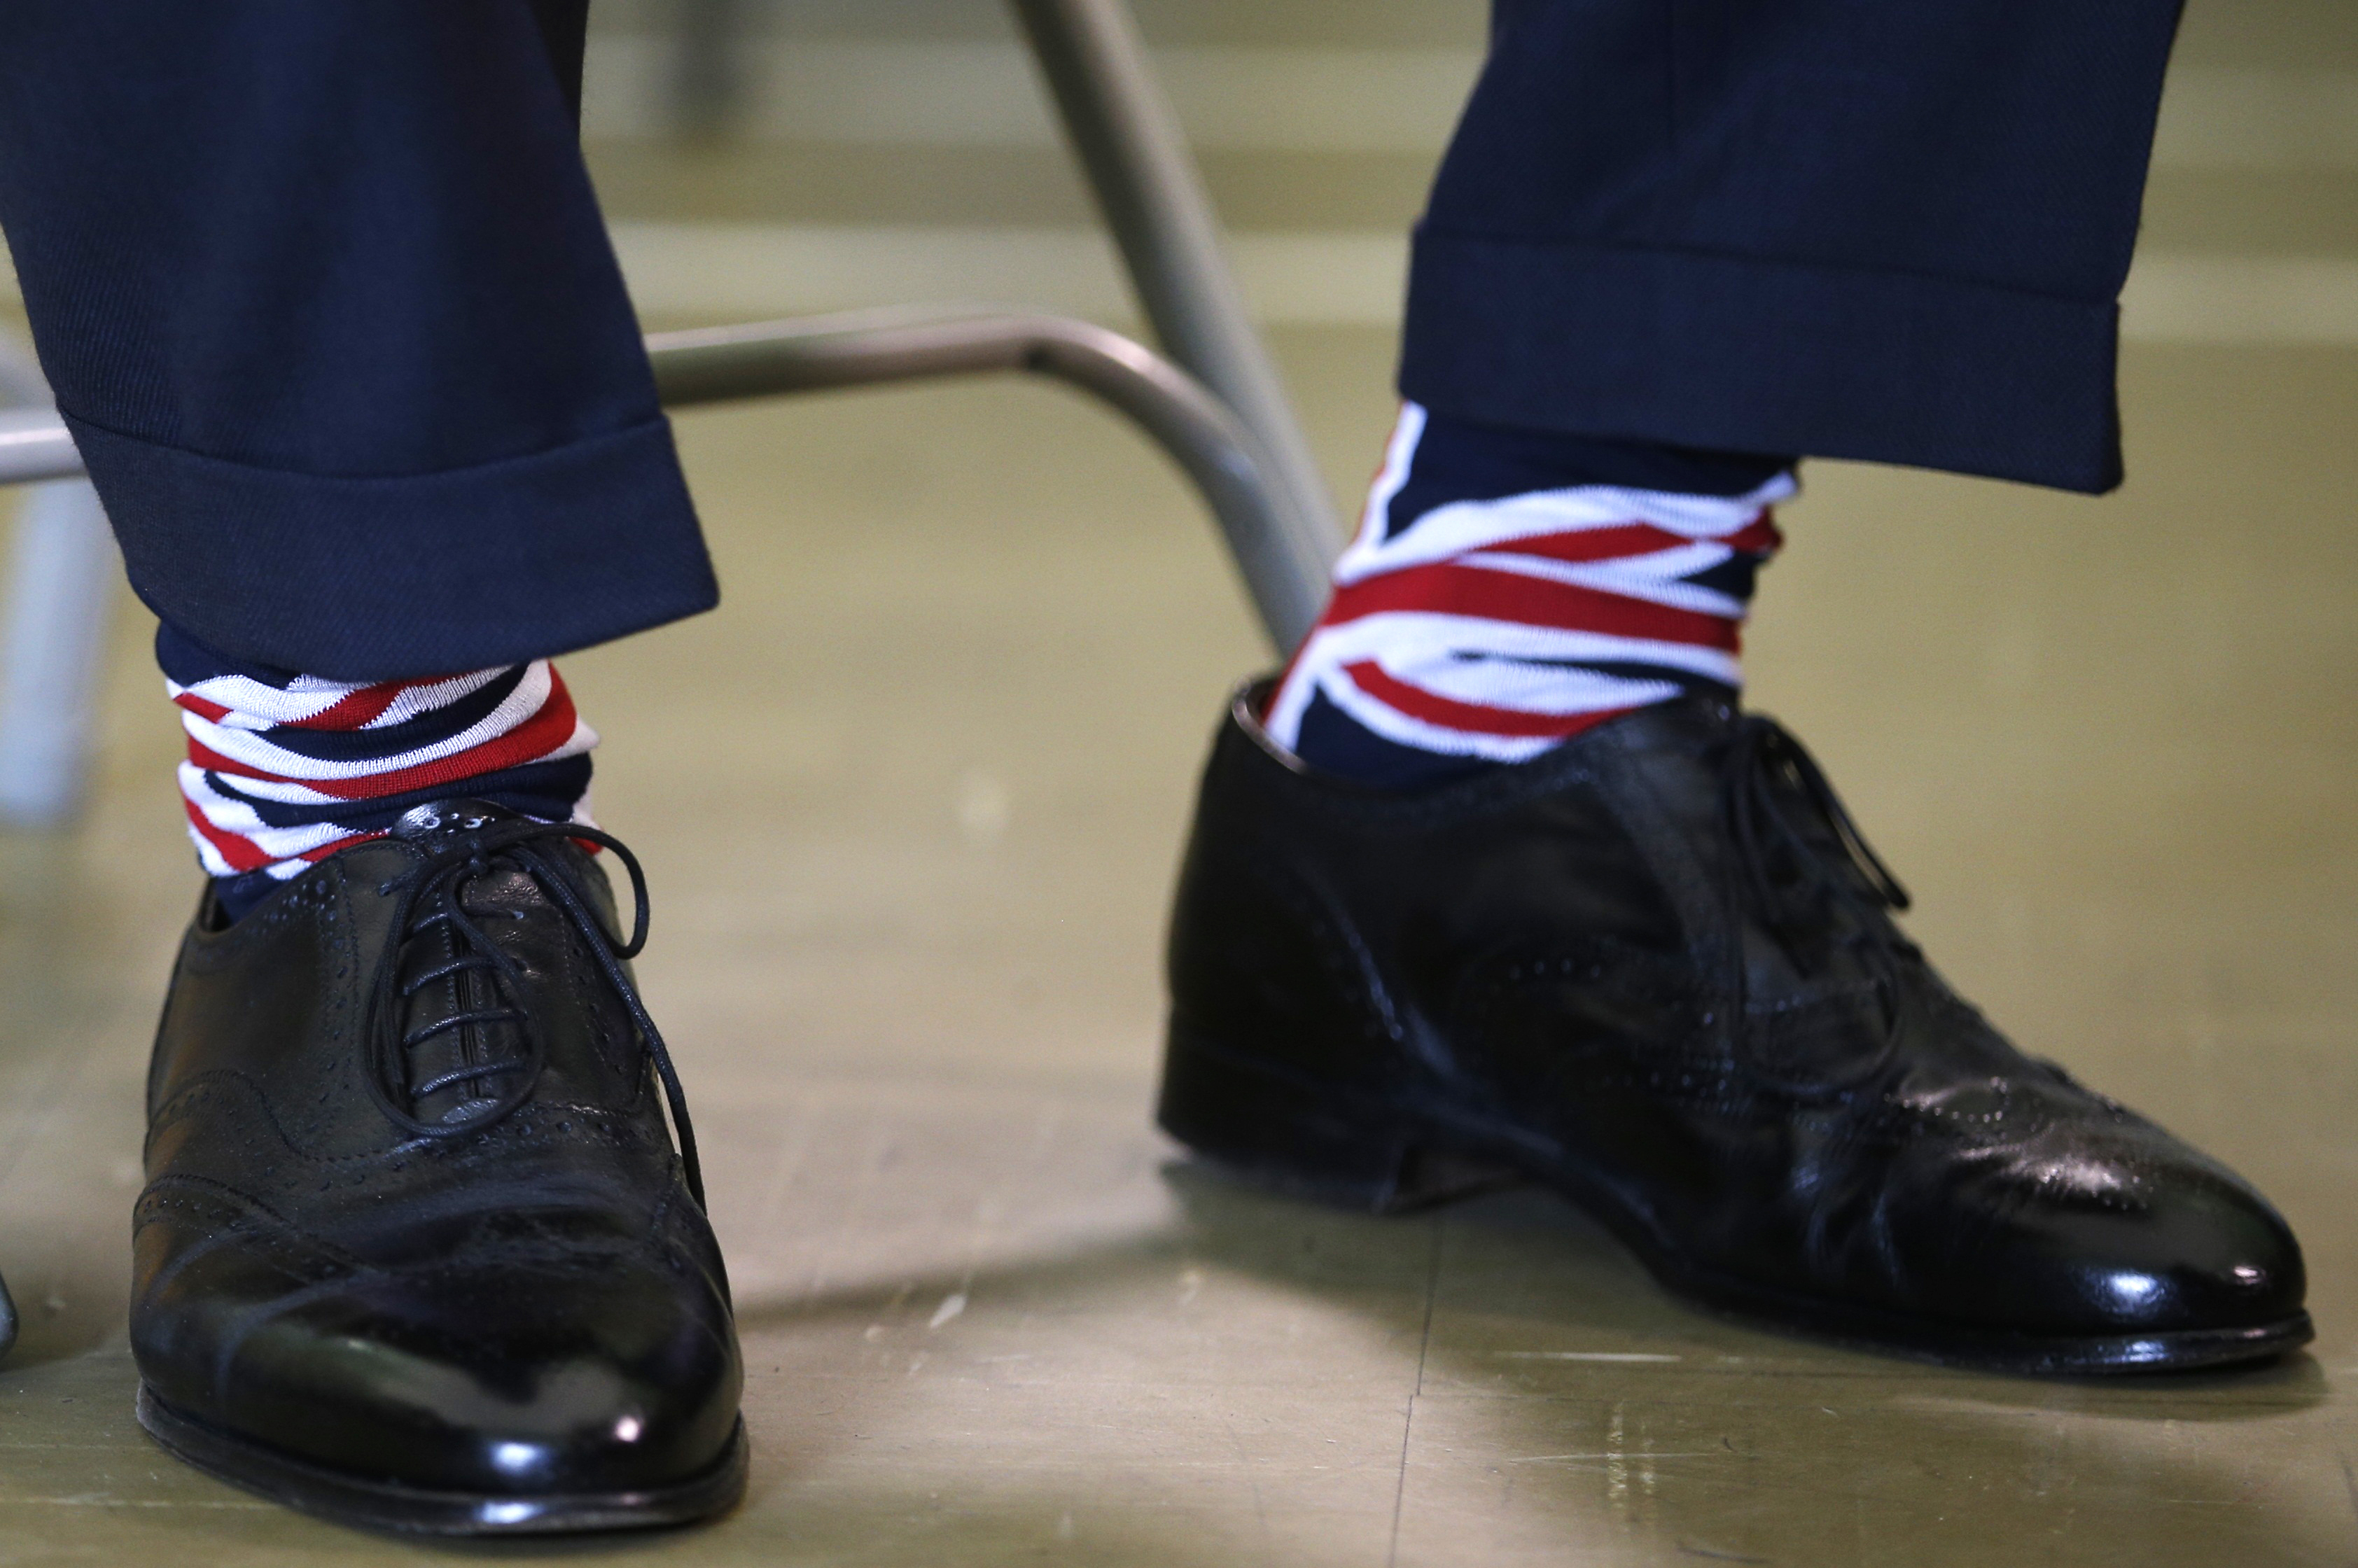 Nigel Farage, the leader of the United Kingdom Independence Party, wears Union Flag themed socks during a visit to a community centre in Clacton, Essex